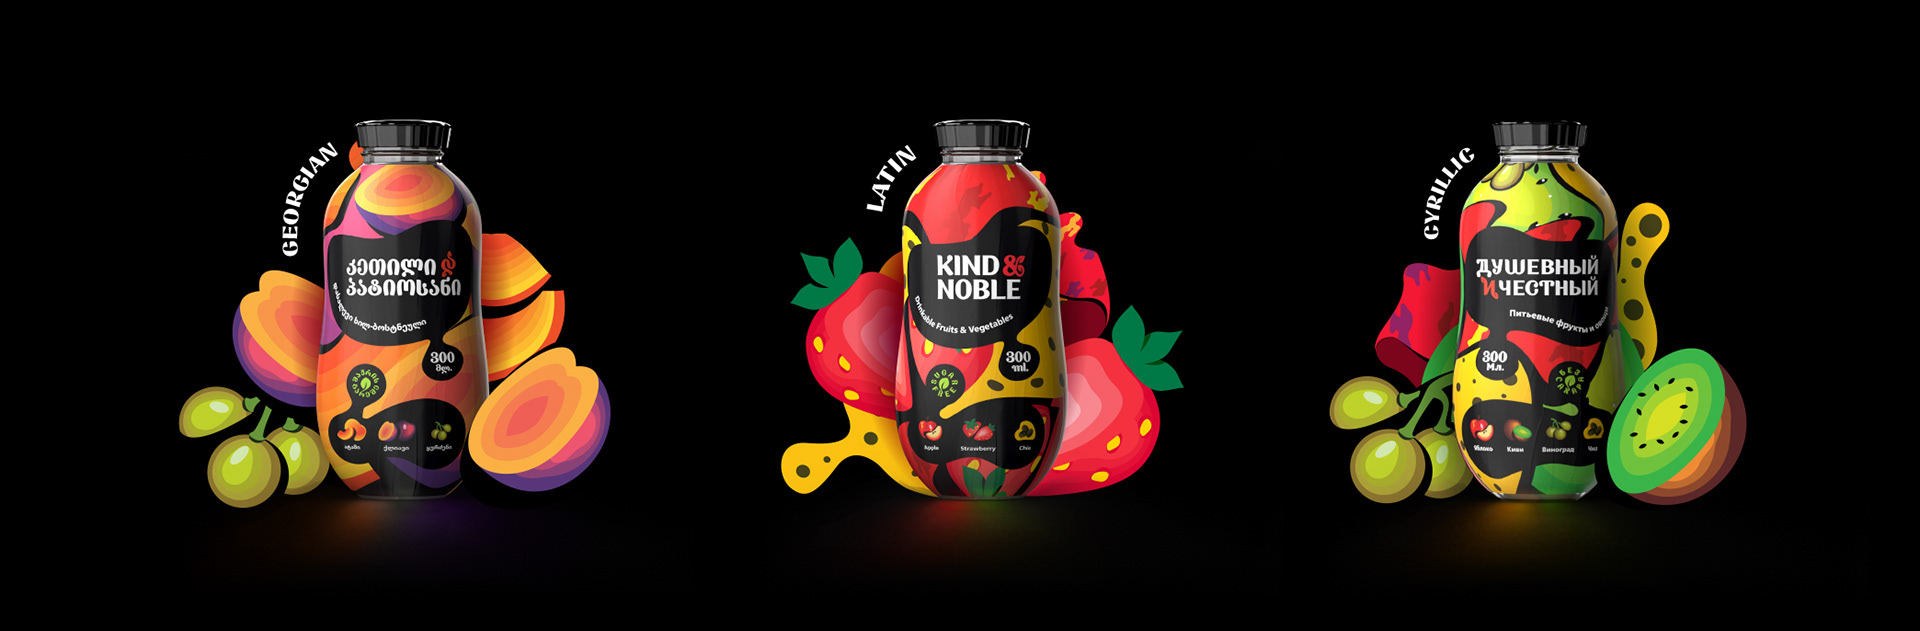 Kind & Noble - Drinkable Fruits and Vegetables